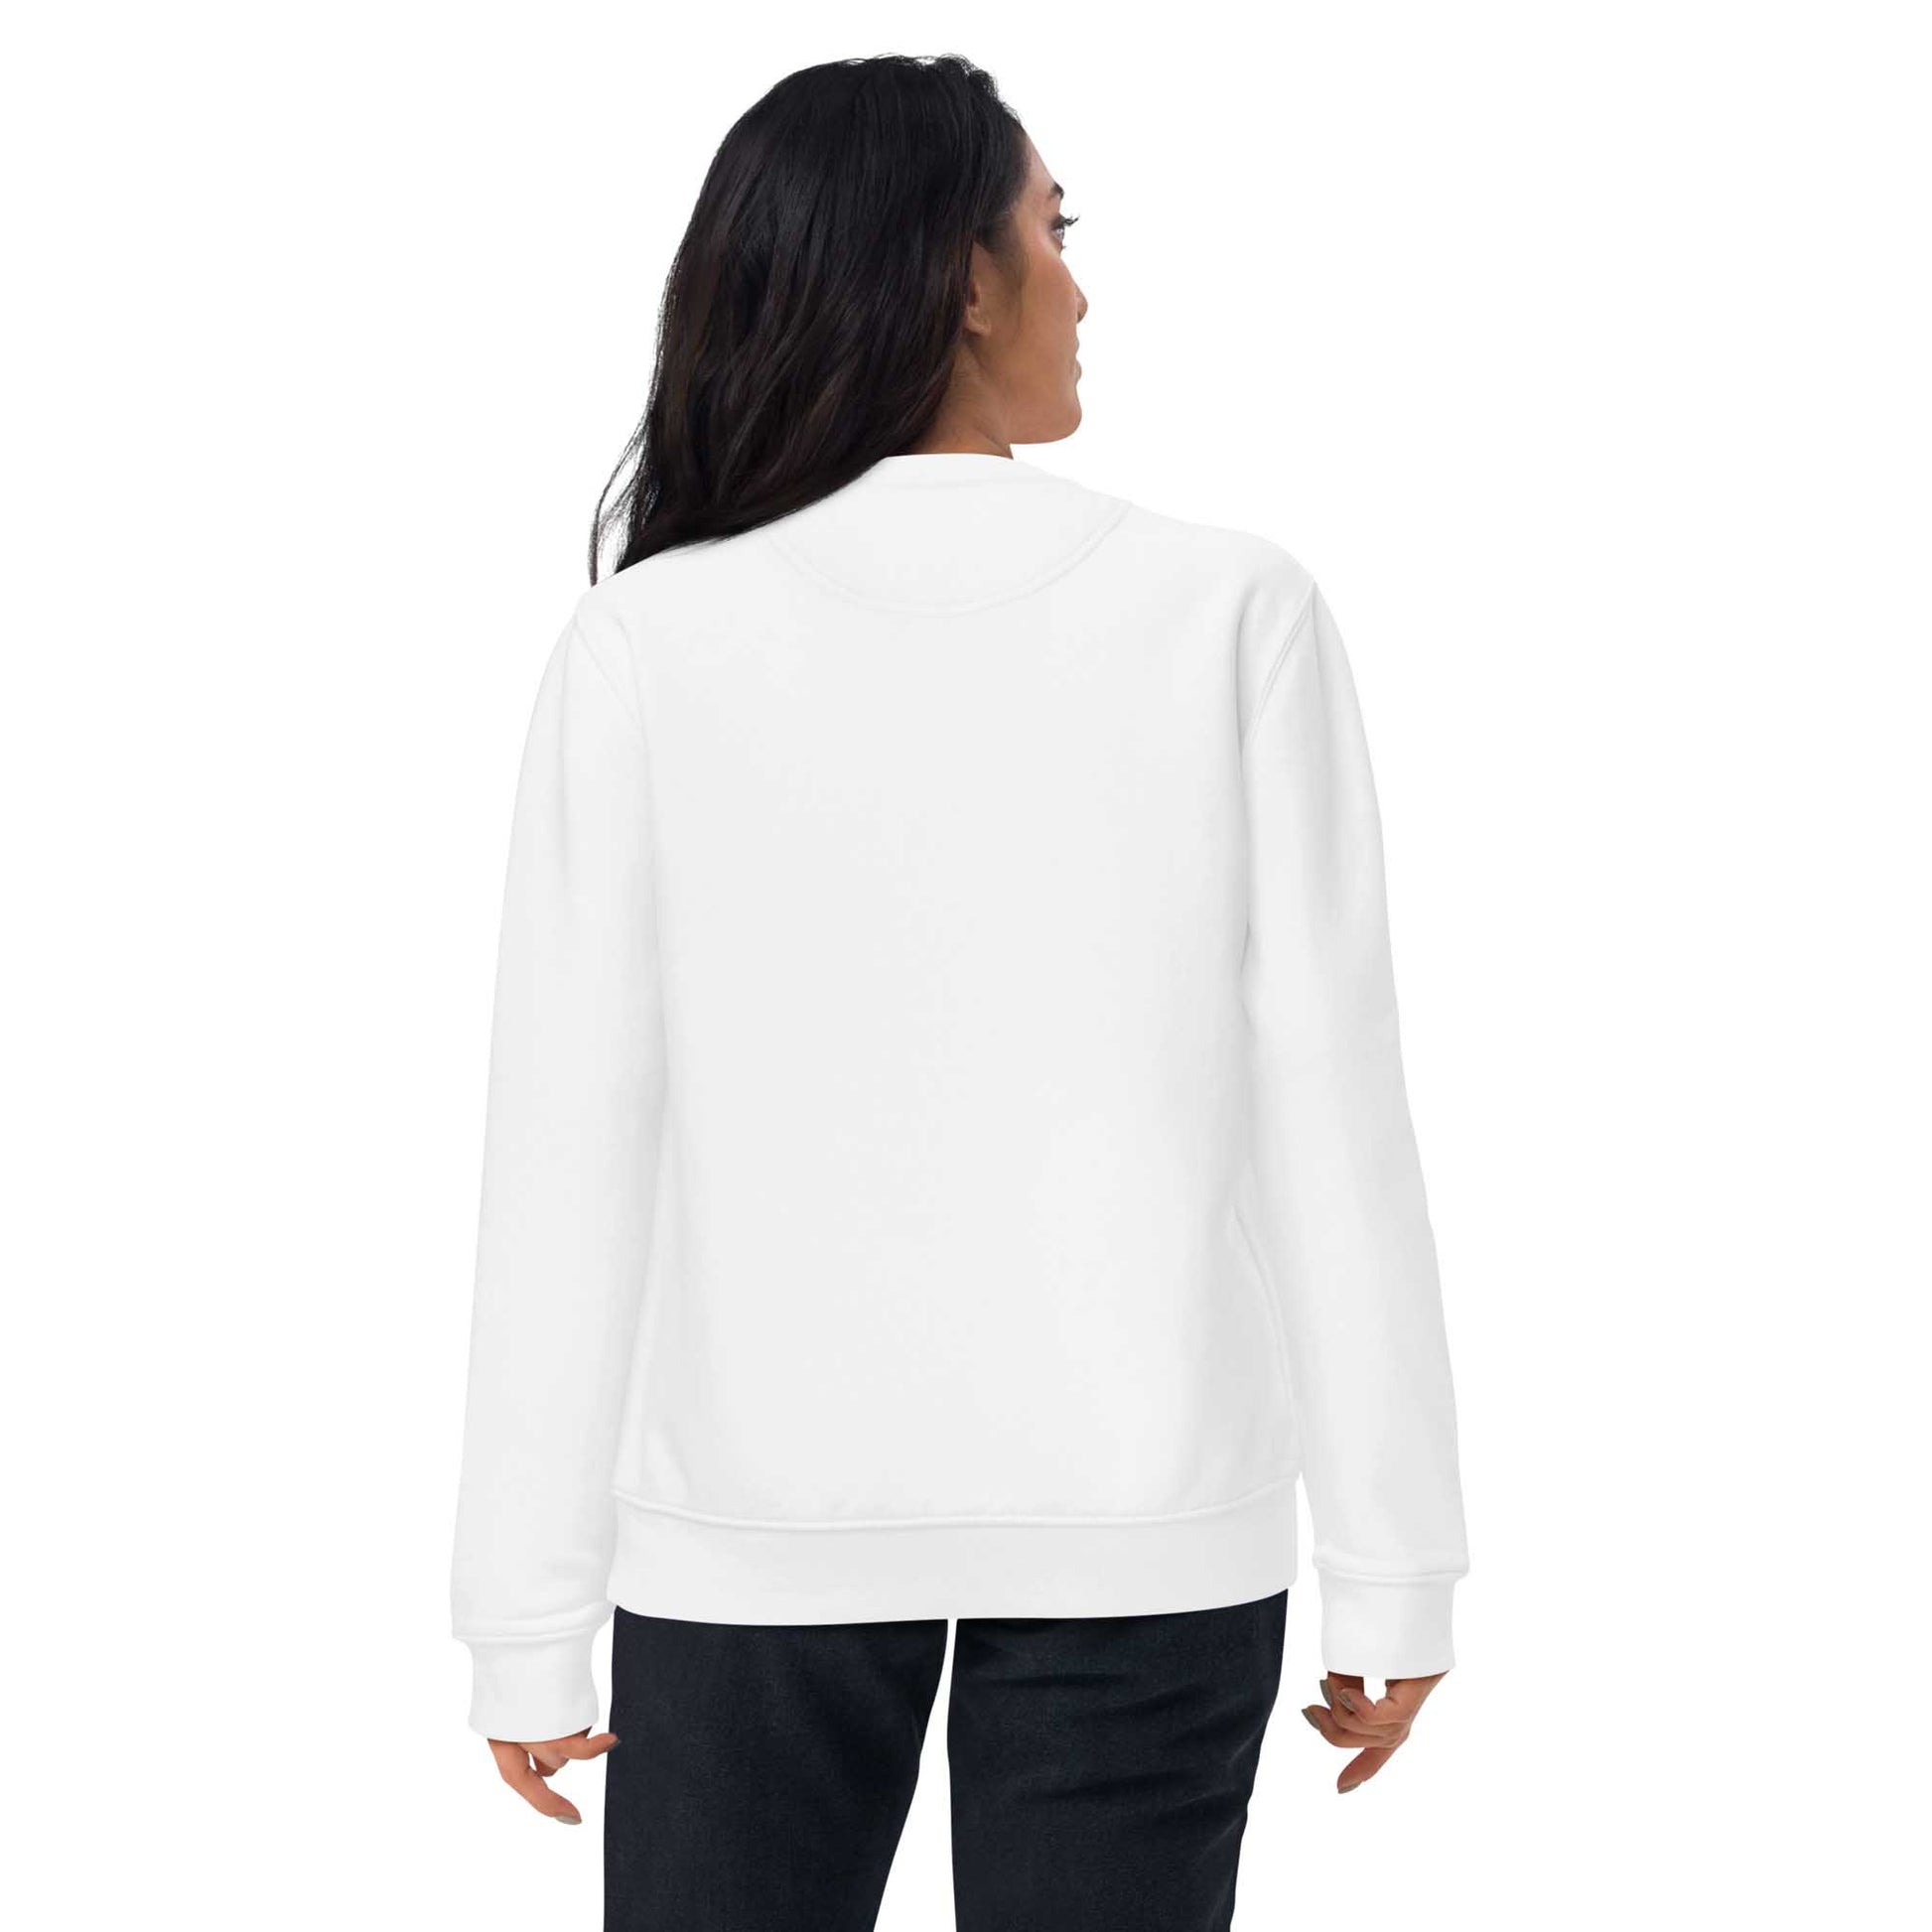 Women white inspirational sweatshirt with Barack Obama's inspirational quote, "Yes We Can." 